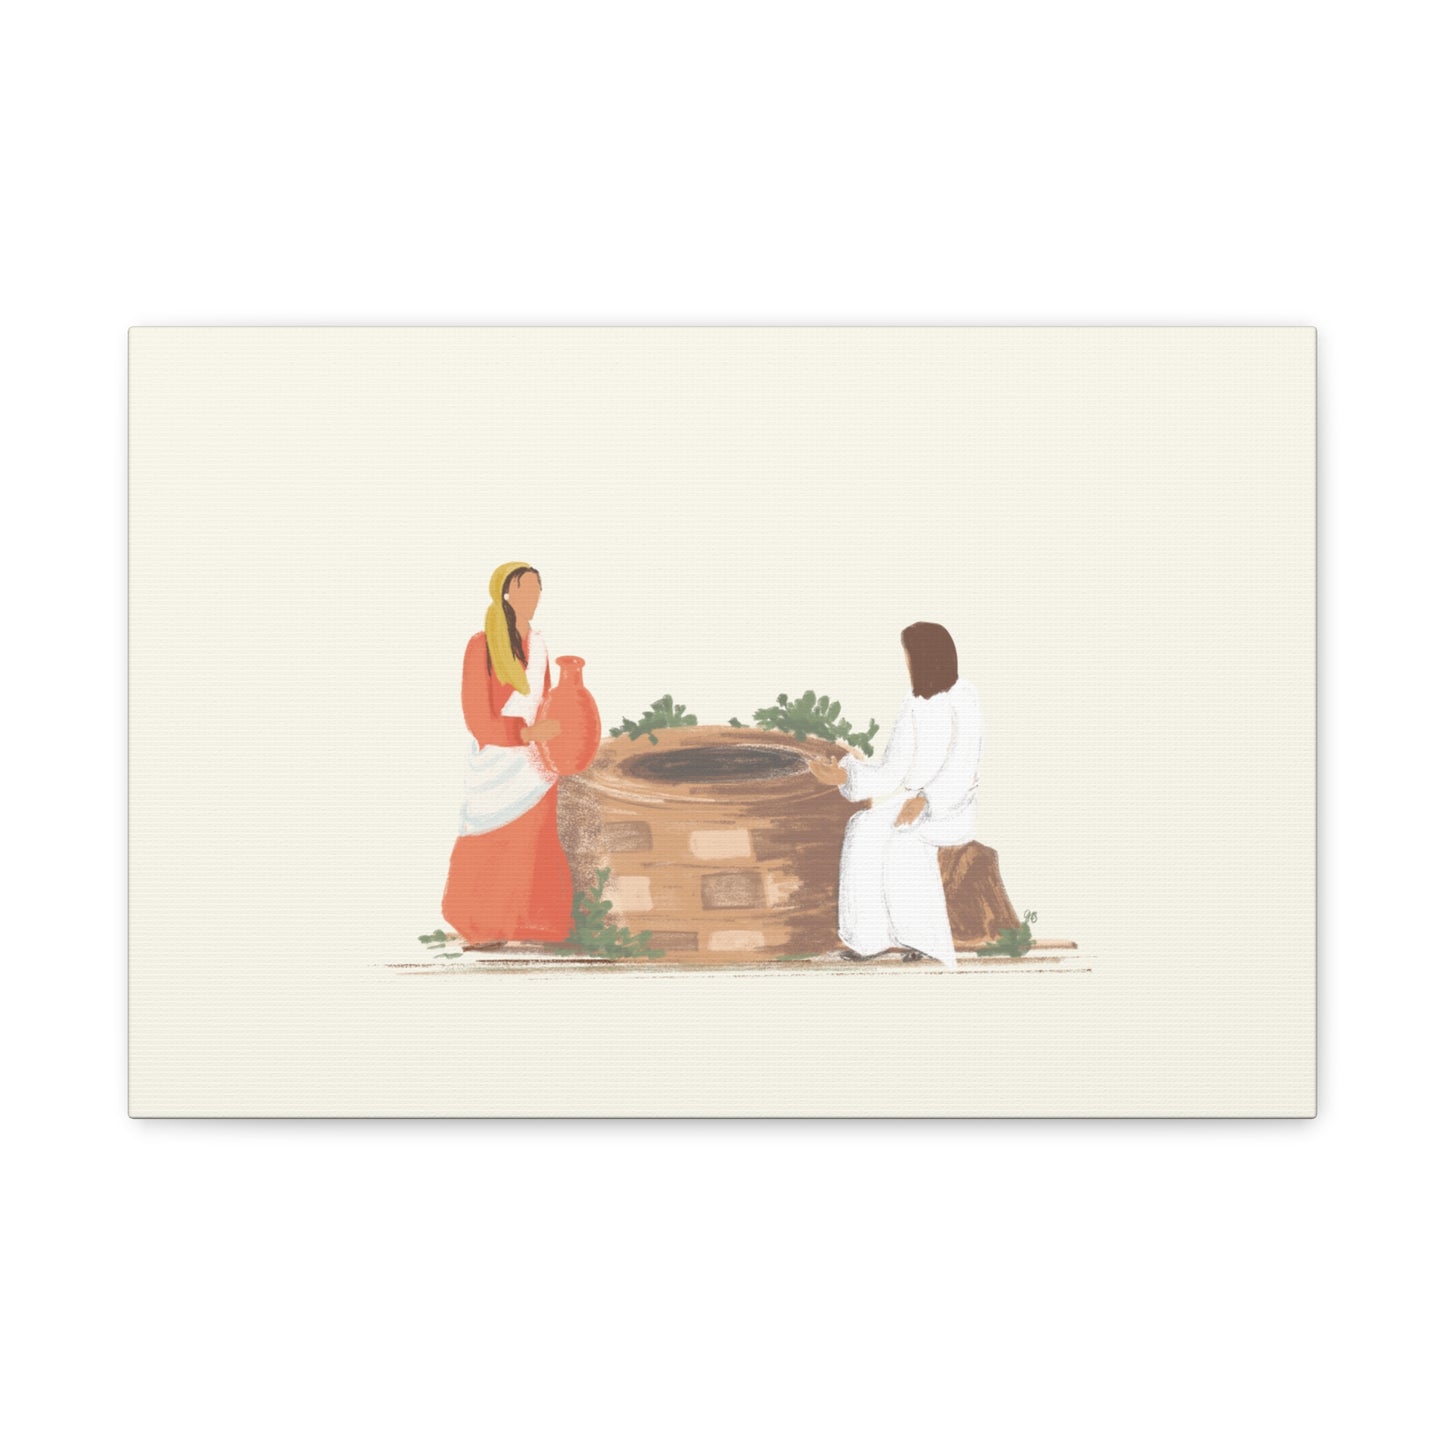 Jesus and the Woman at the Well - Canvas Gallery Wrap